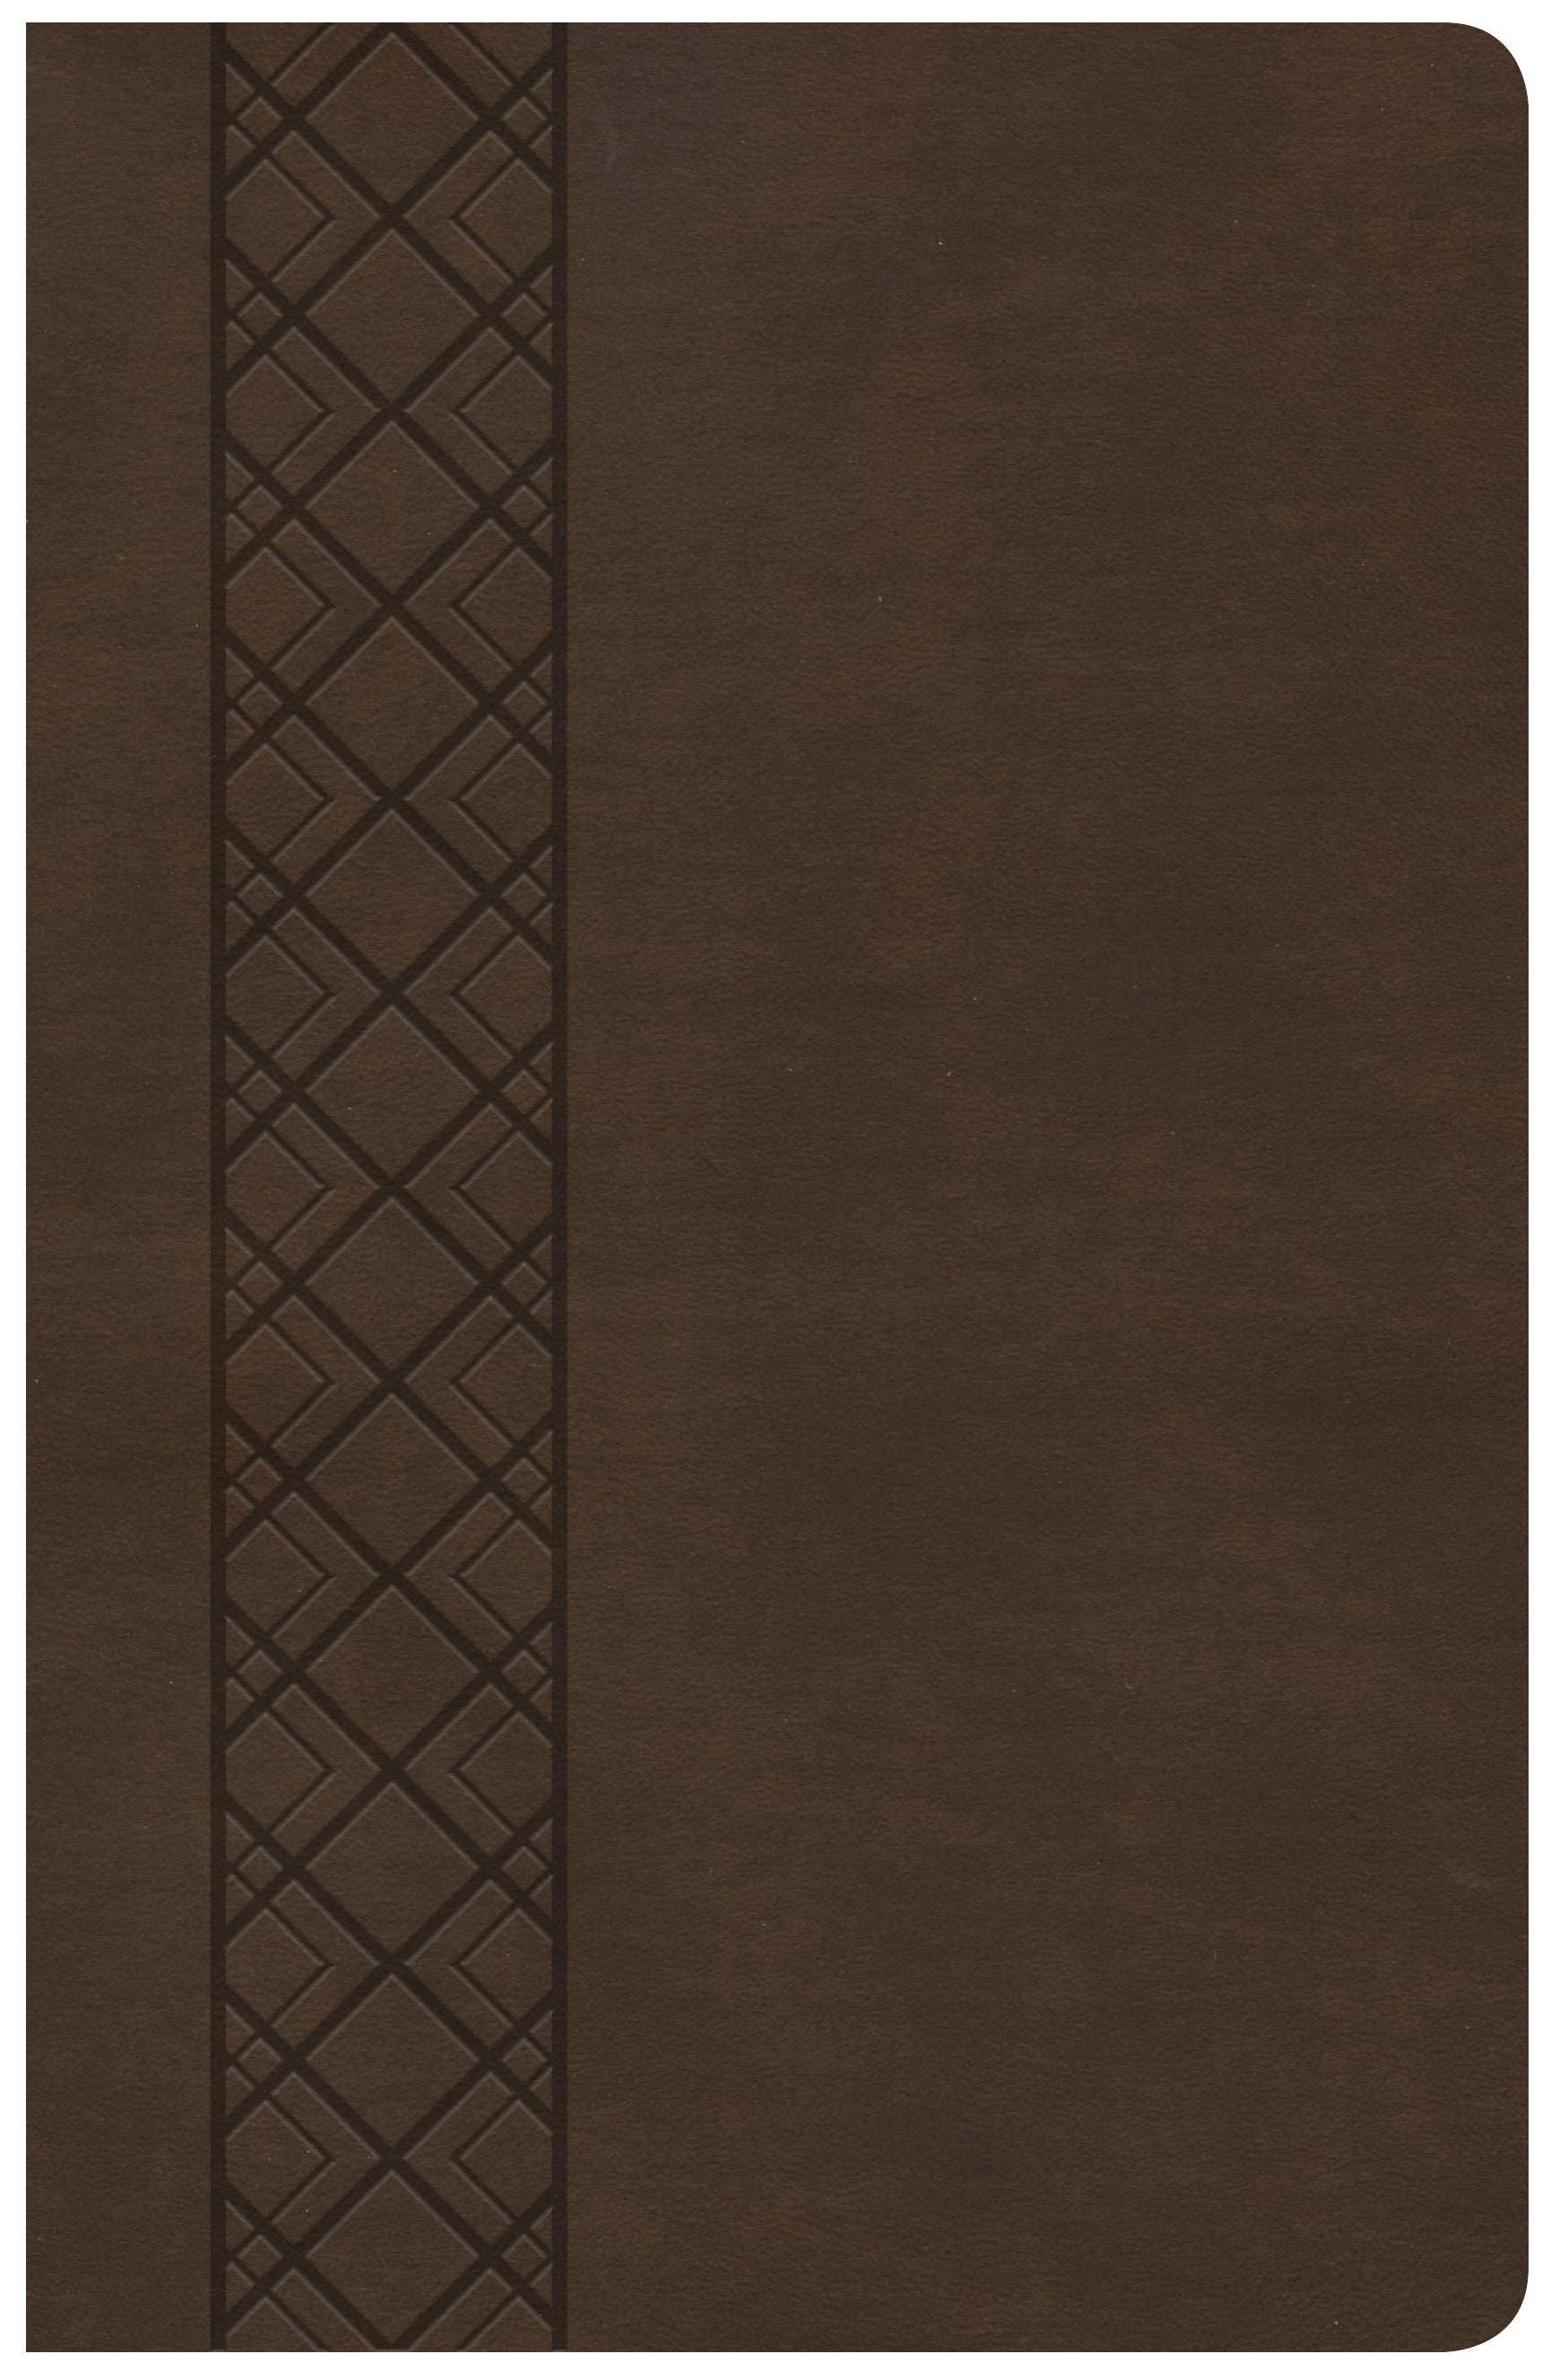 Image of KJV Ultrathin Reference Bible, Value Edition, Brown LeatherT other